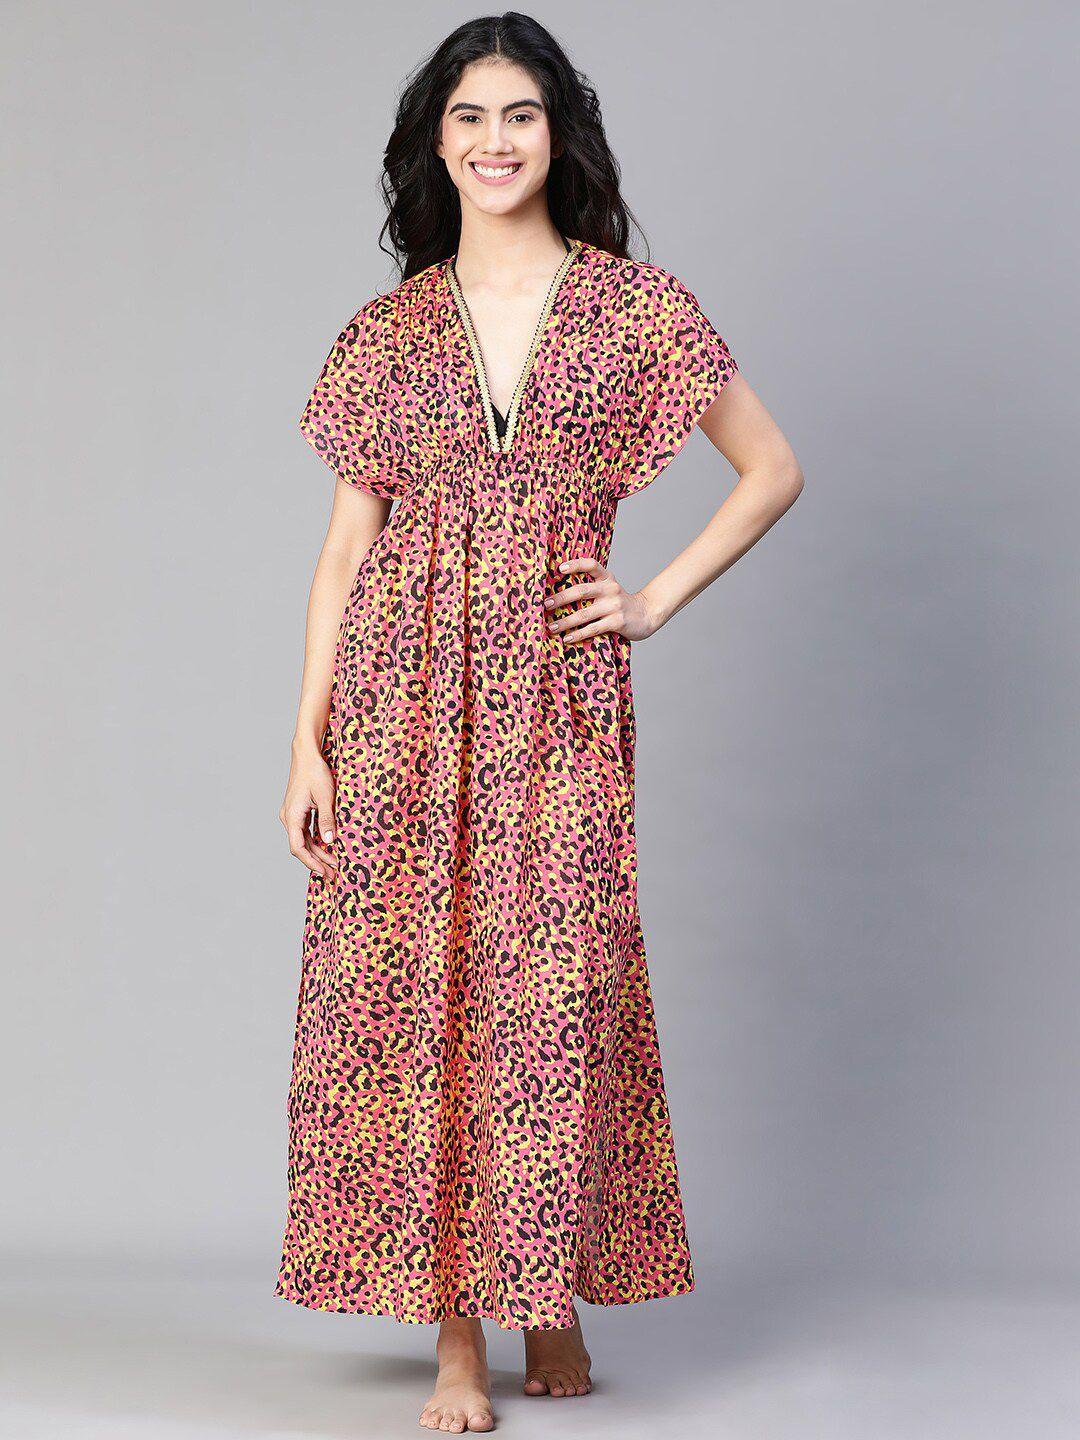 oxolloxo animal printed cotton cover-up dress